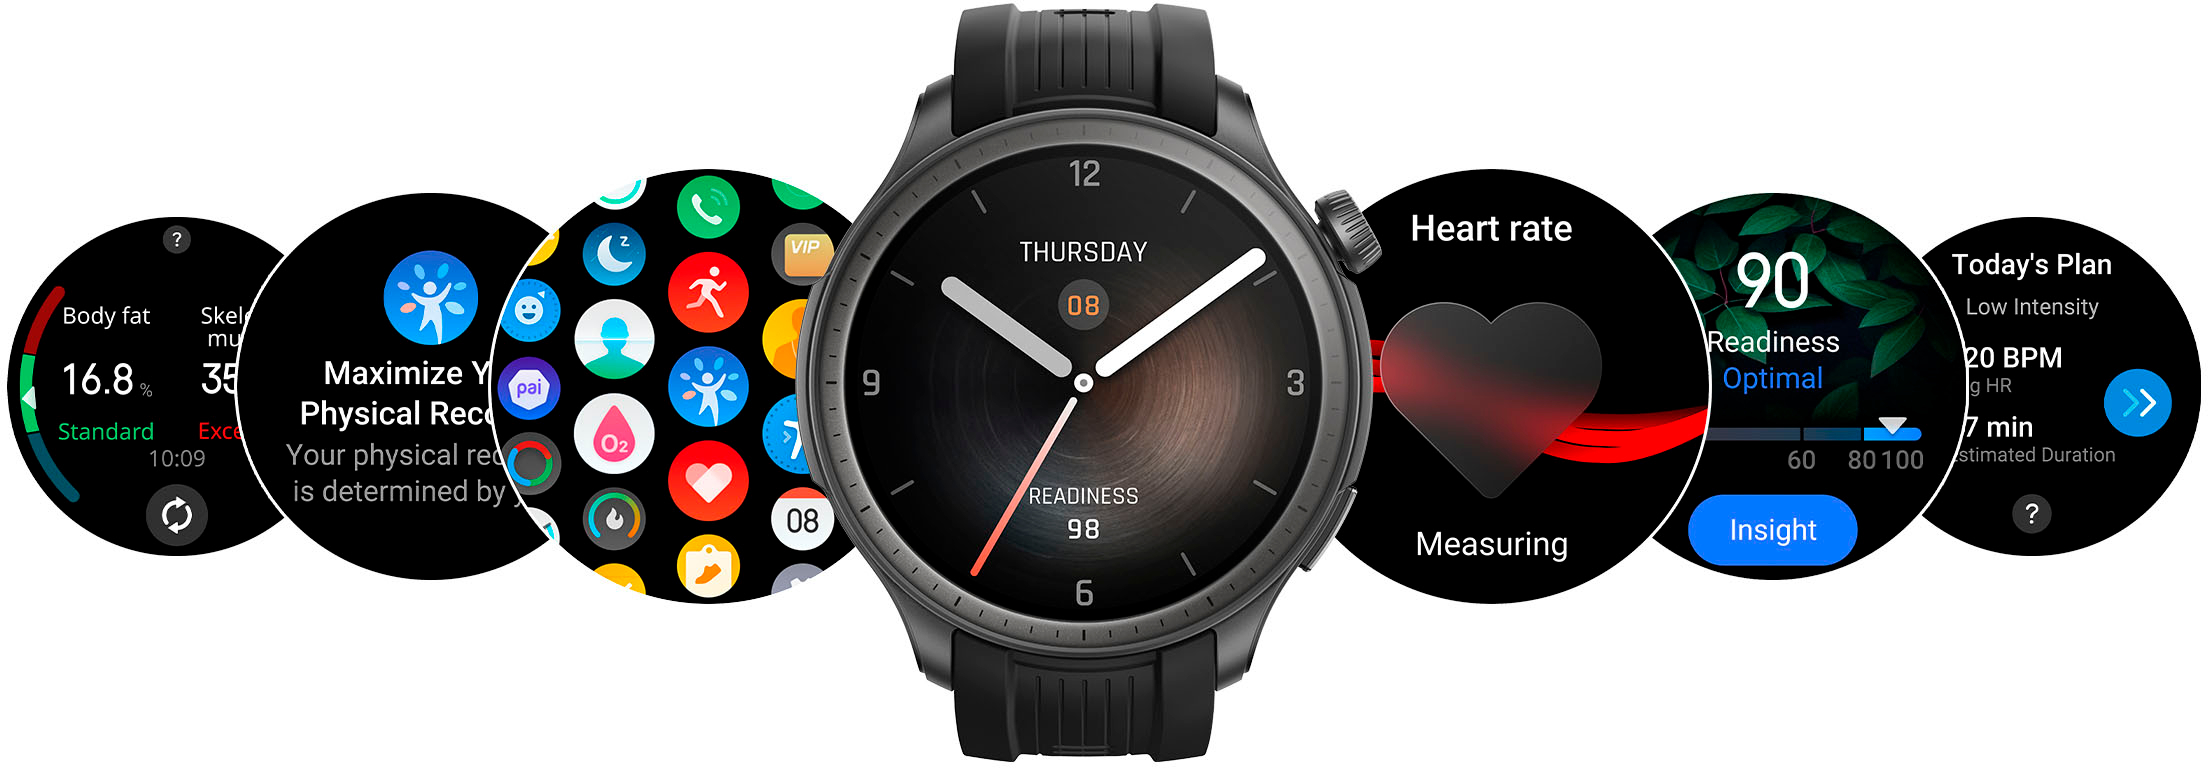 Amazfit Balance: AMOLED display, 46mm body, water protection and AI  features to track health metrics